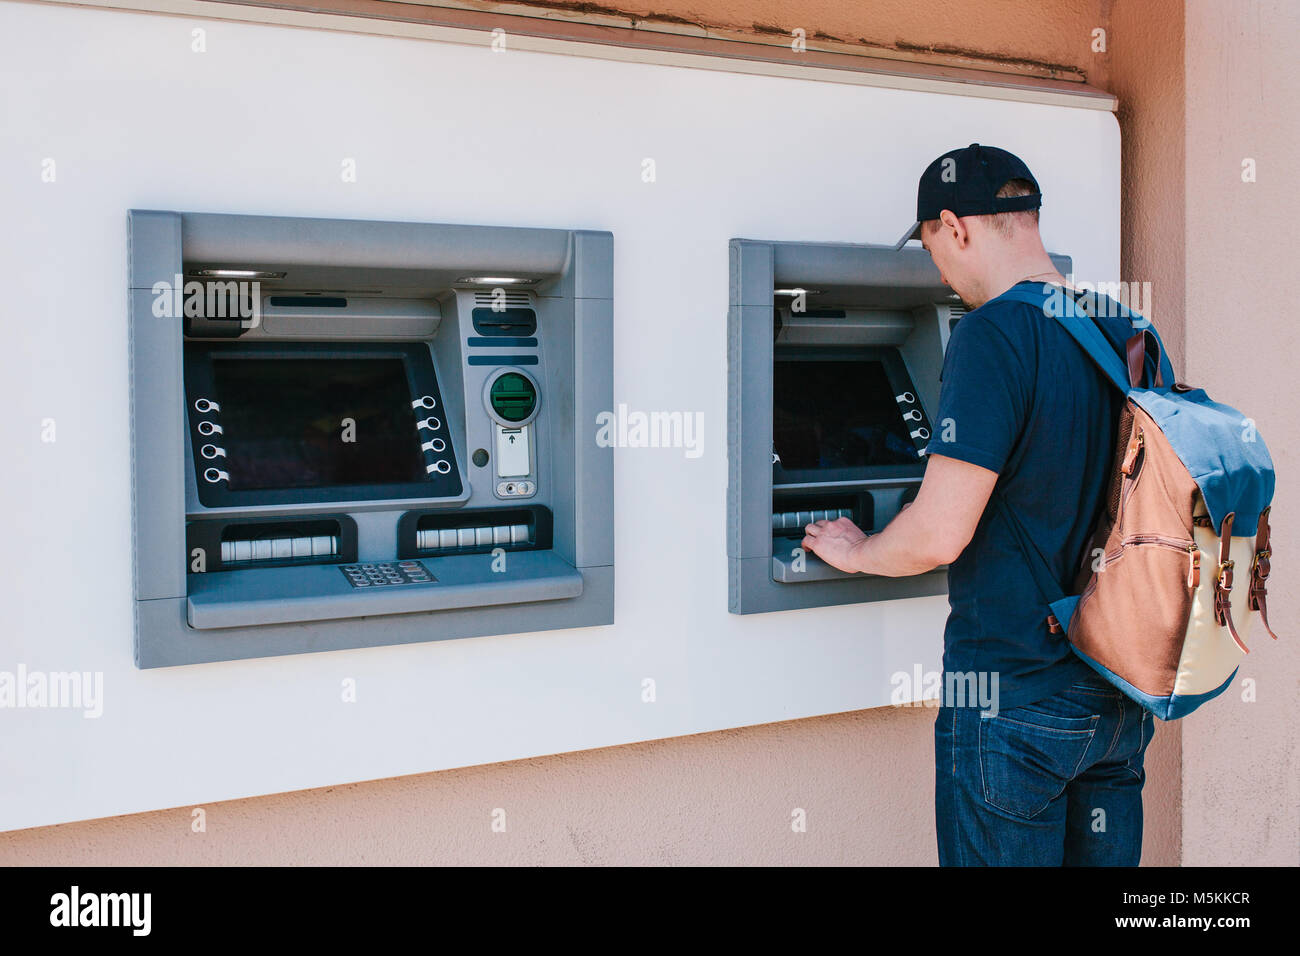 The tourist withdraws money from the ATM for further travel. Finance, credit card, withdrawal of money. Journey. Vacation. Stock Photo